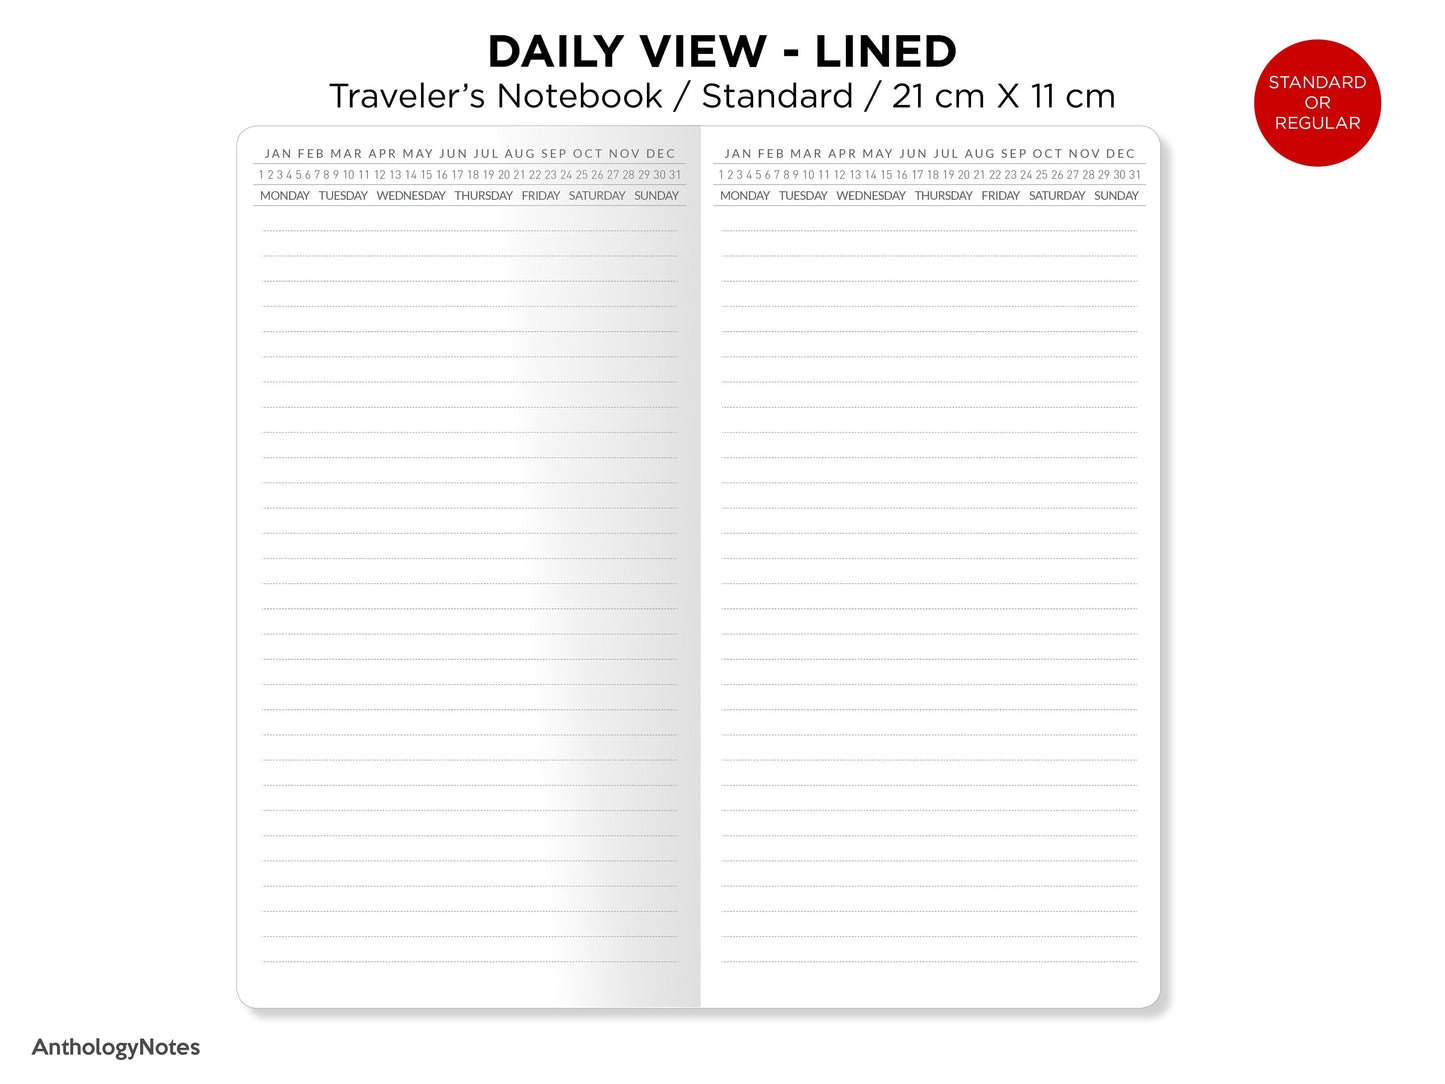 Daily View LINED Traveler's Notebook Standard Size Minimalist UNDATED Printable Insert